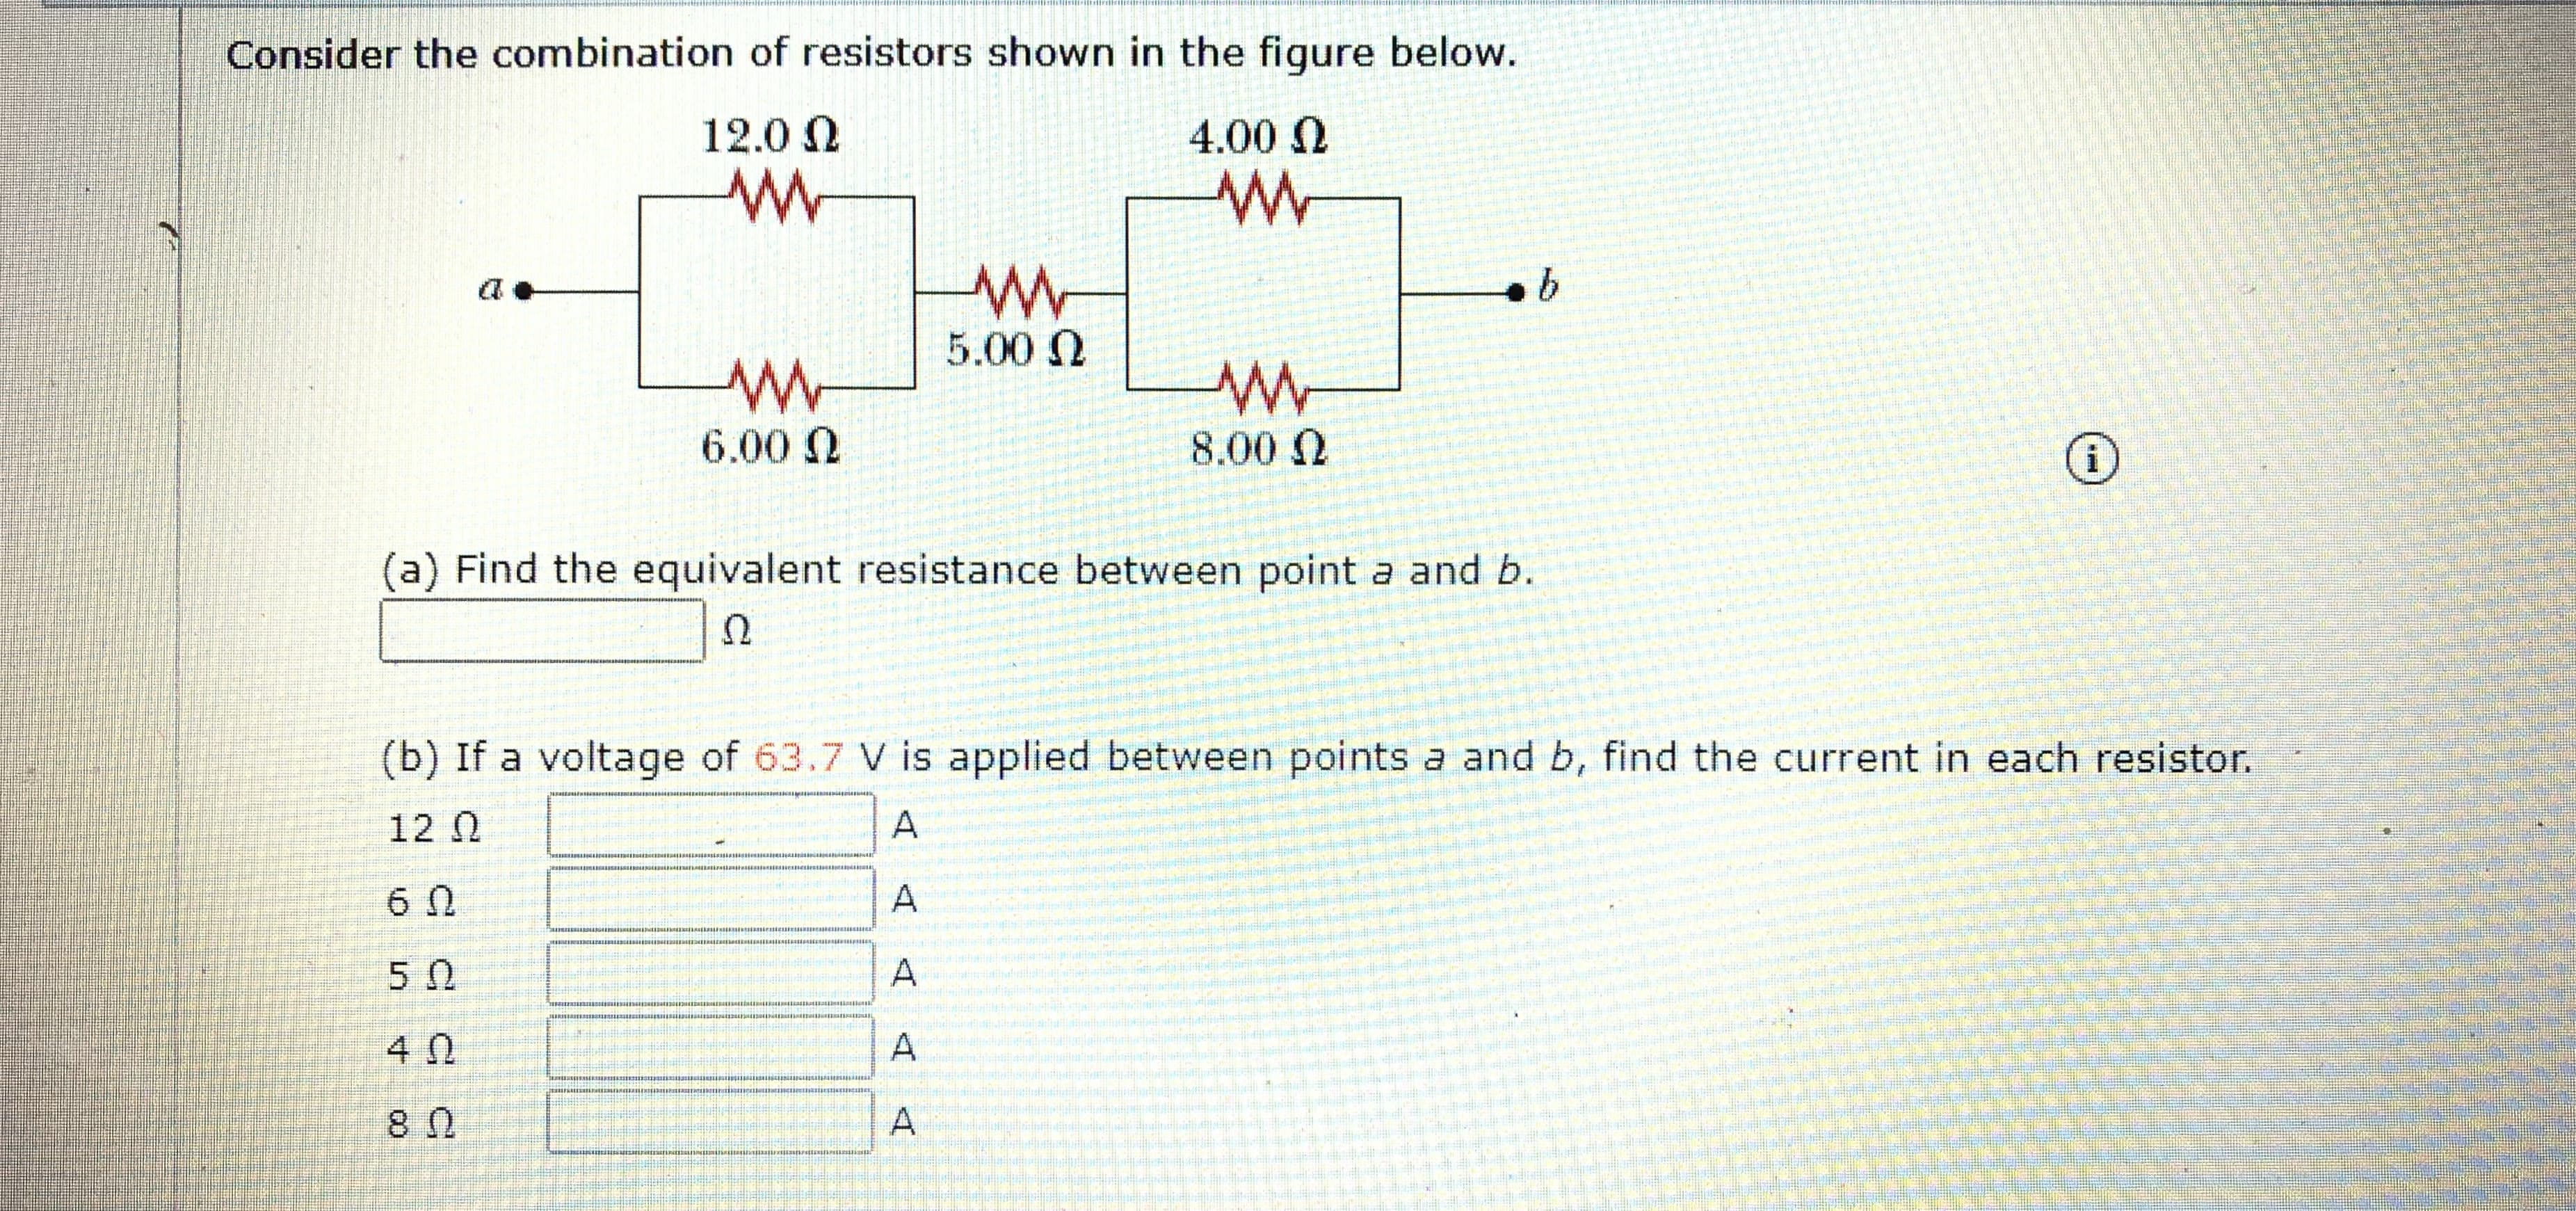 Consider the combination of resistors shown in the figure below.
12.0 N
4.00 N
5.00 N
6.00 N
8.00 N
(a) Find the equivalent resistance between point a and b.
